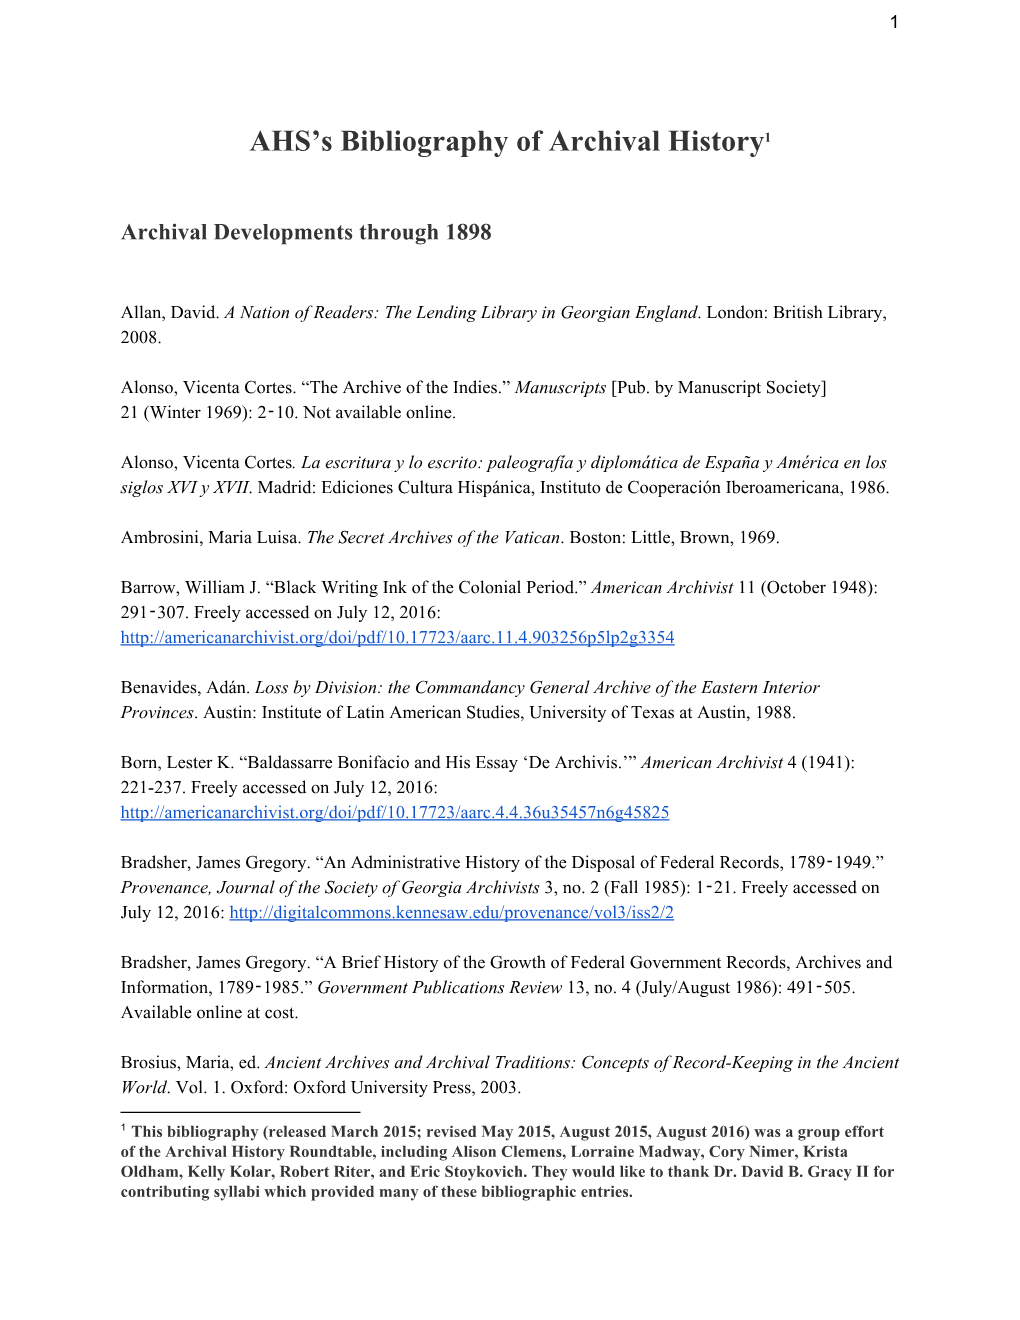 AHS's Bibliography of Archival History 1